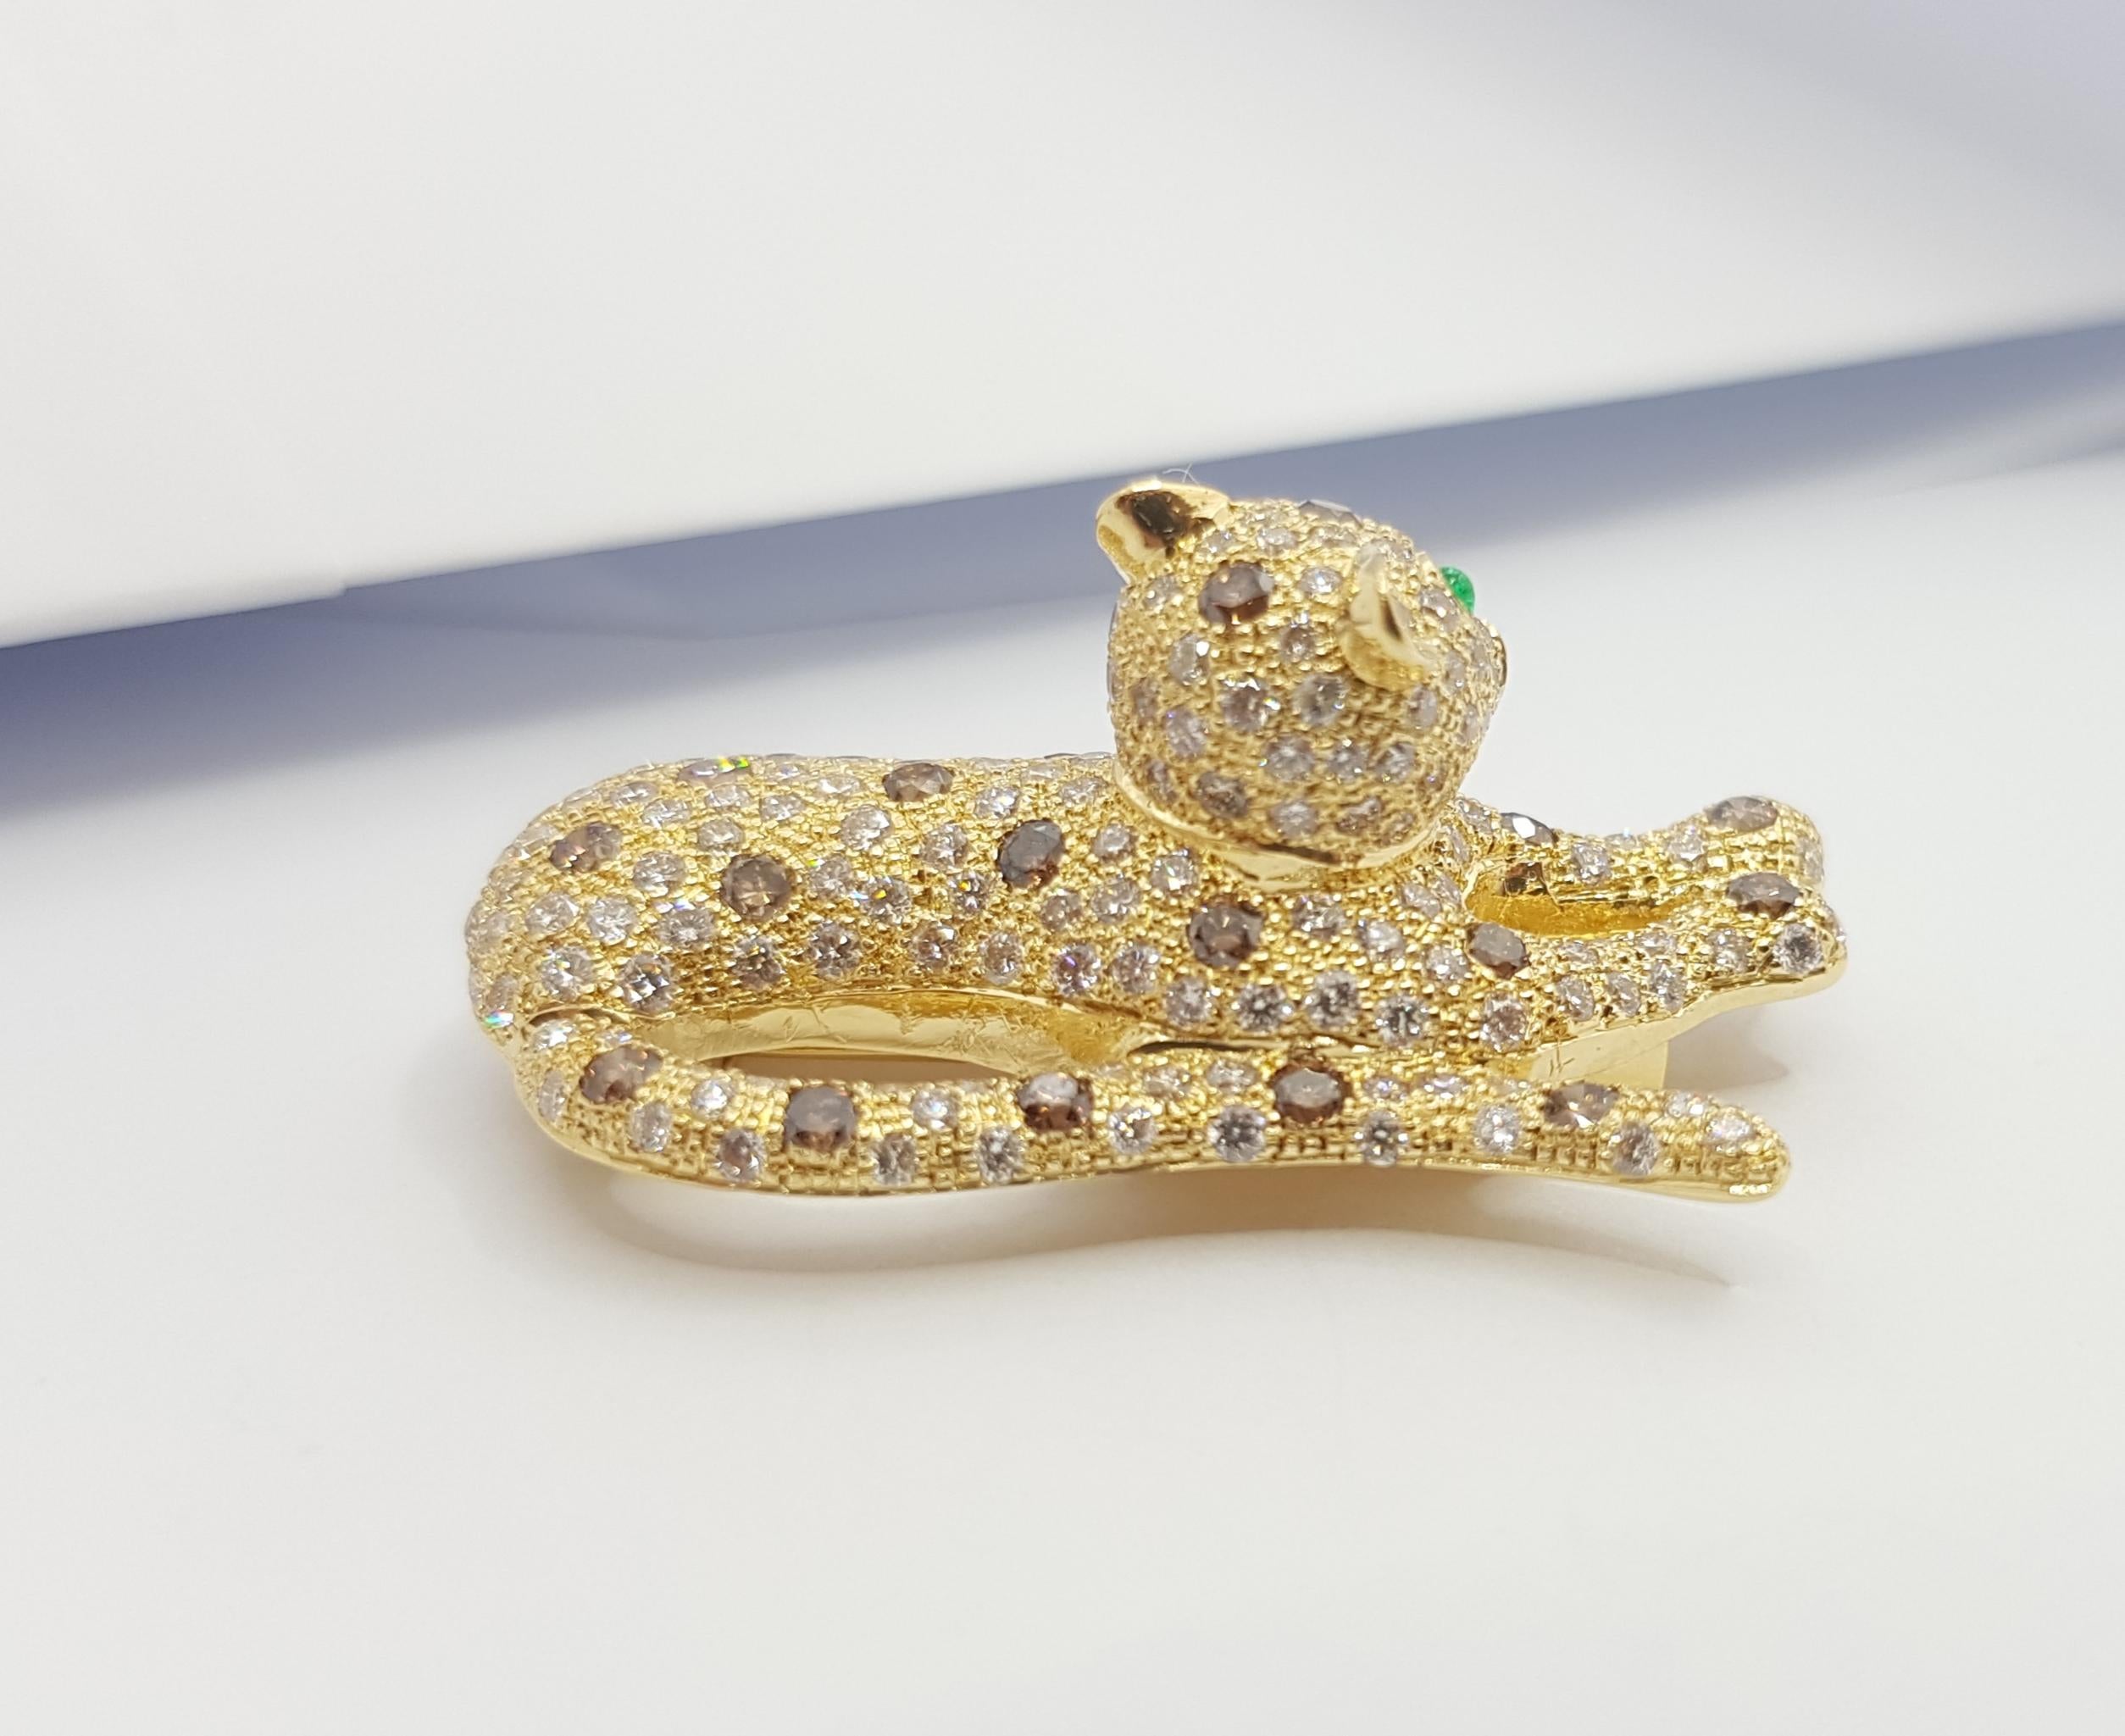 Brown Diamond with Emerald Panther Brooch Set in 18 Karat Gold For Sale 7